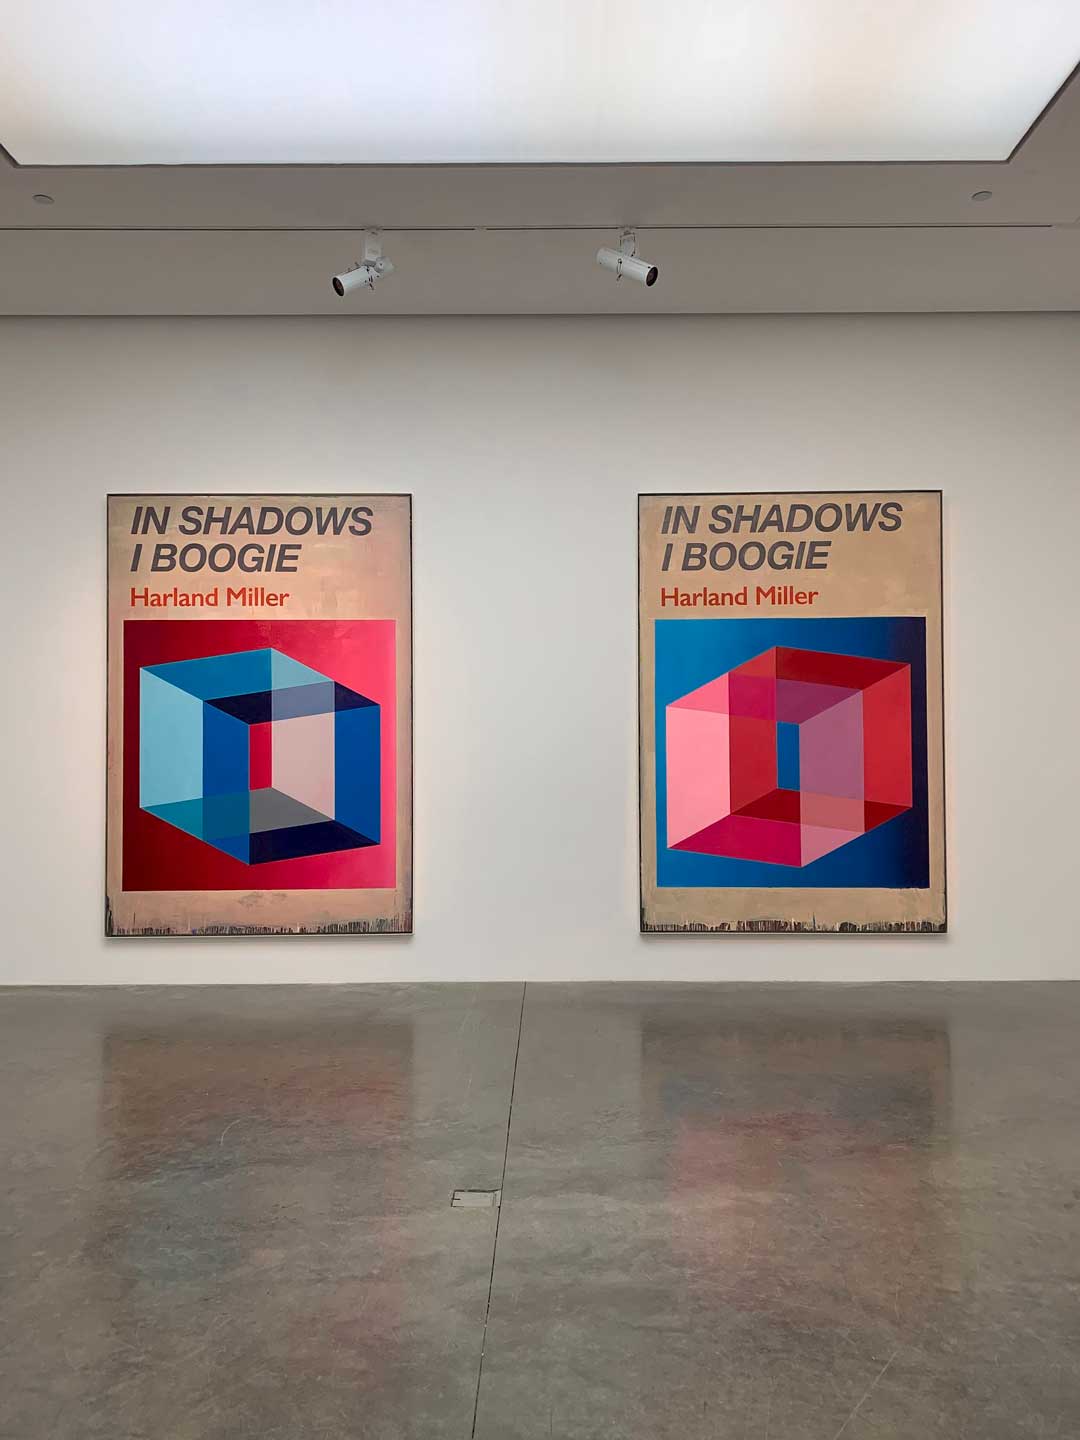 Harland Miller's paintings of In Shadows I Boogie at White Cube